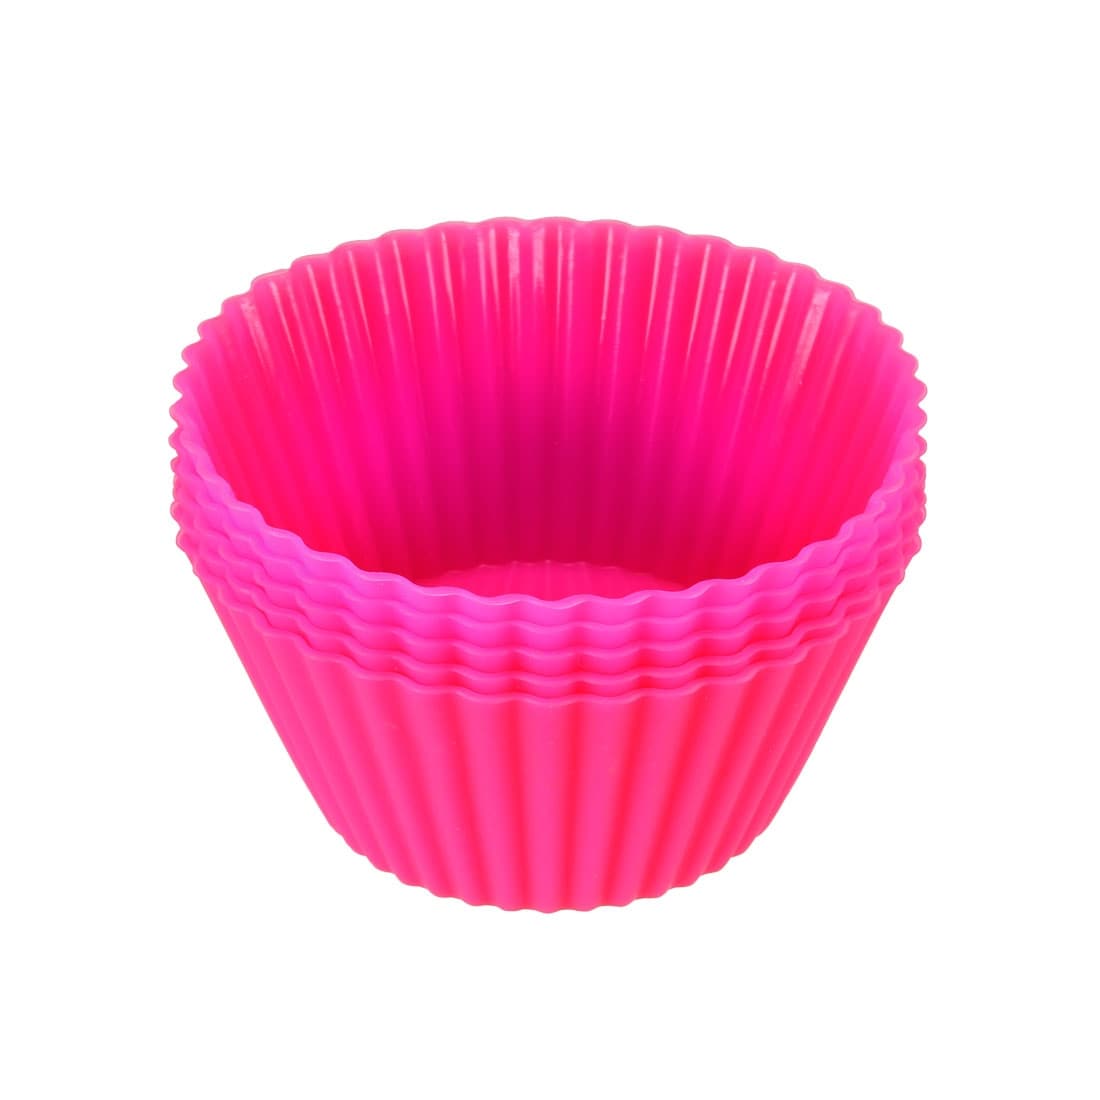 Silicone Cupcake Liners Reusable Baking Cups Pastry Muffin Molds 5Pcs  Orange